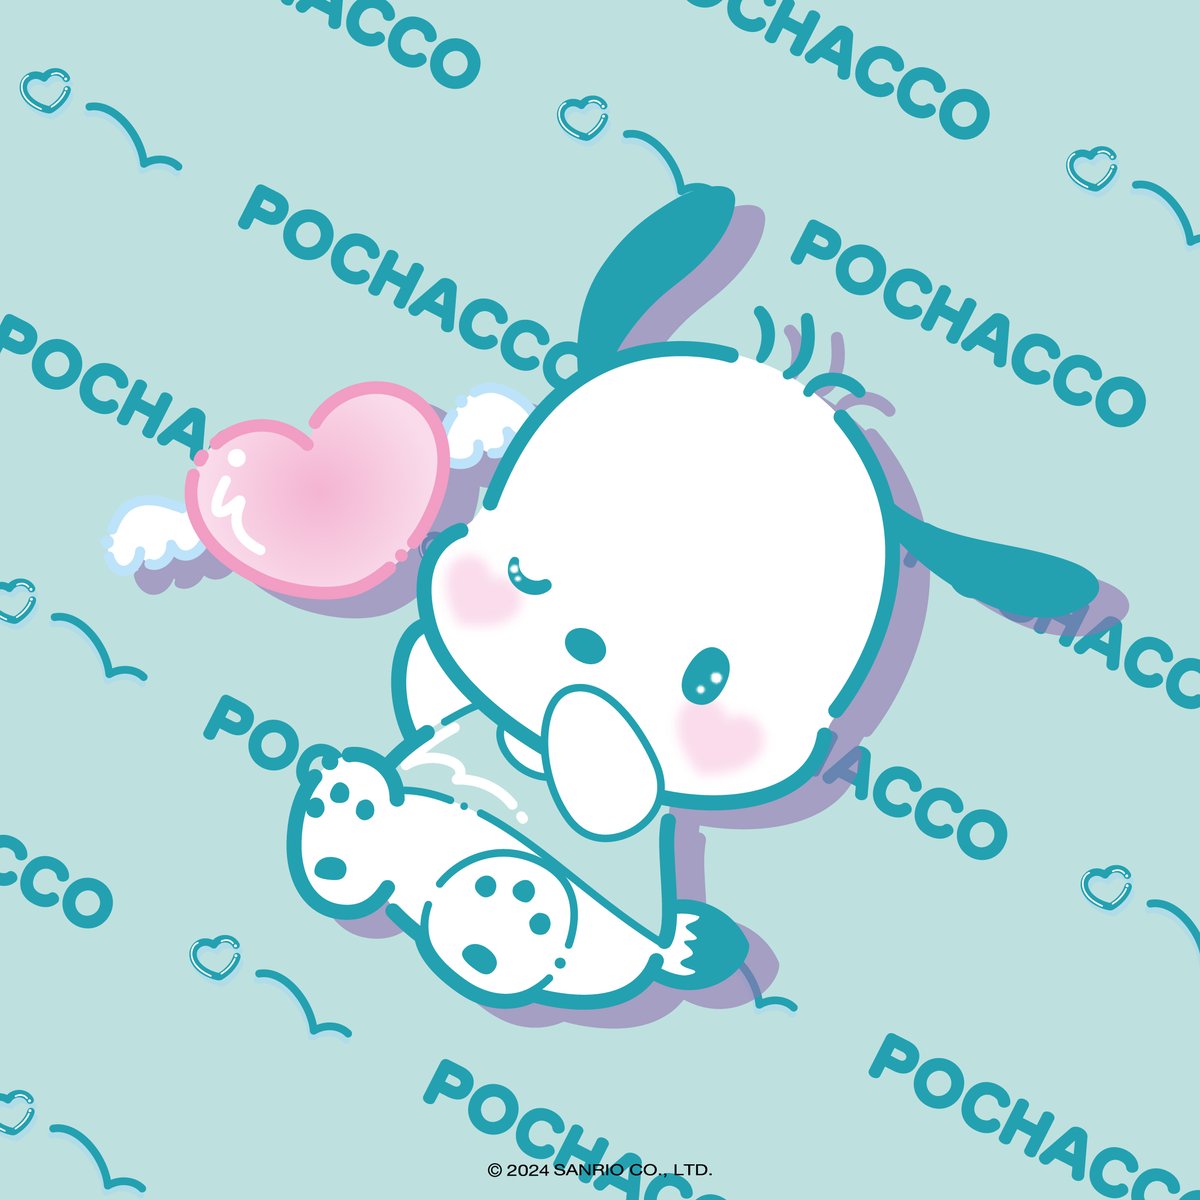 Is Pochacco your favourite Hello Kitty and Friends character? 🐶
💖 If so, be sure to vote for him for this year's Annual Character Ranking! (Link in Bio) 🌐😍 

#HelloKittyandFriends #Sanrio #SanrioCharacterRanking